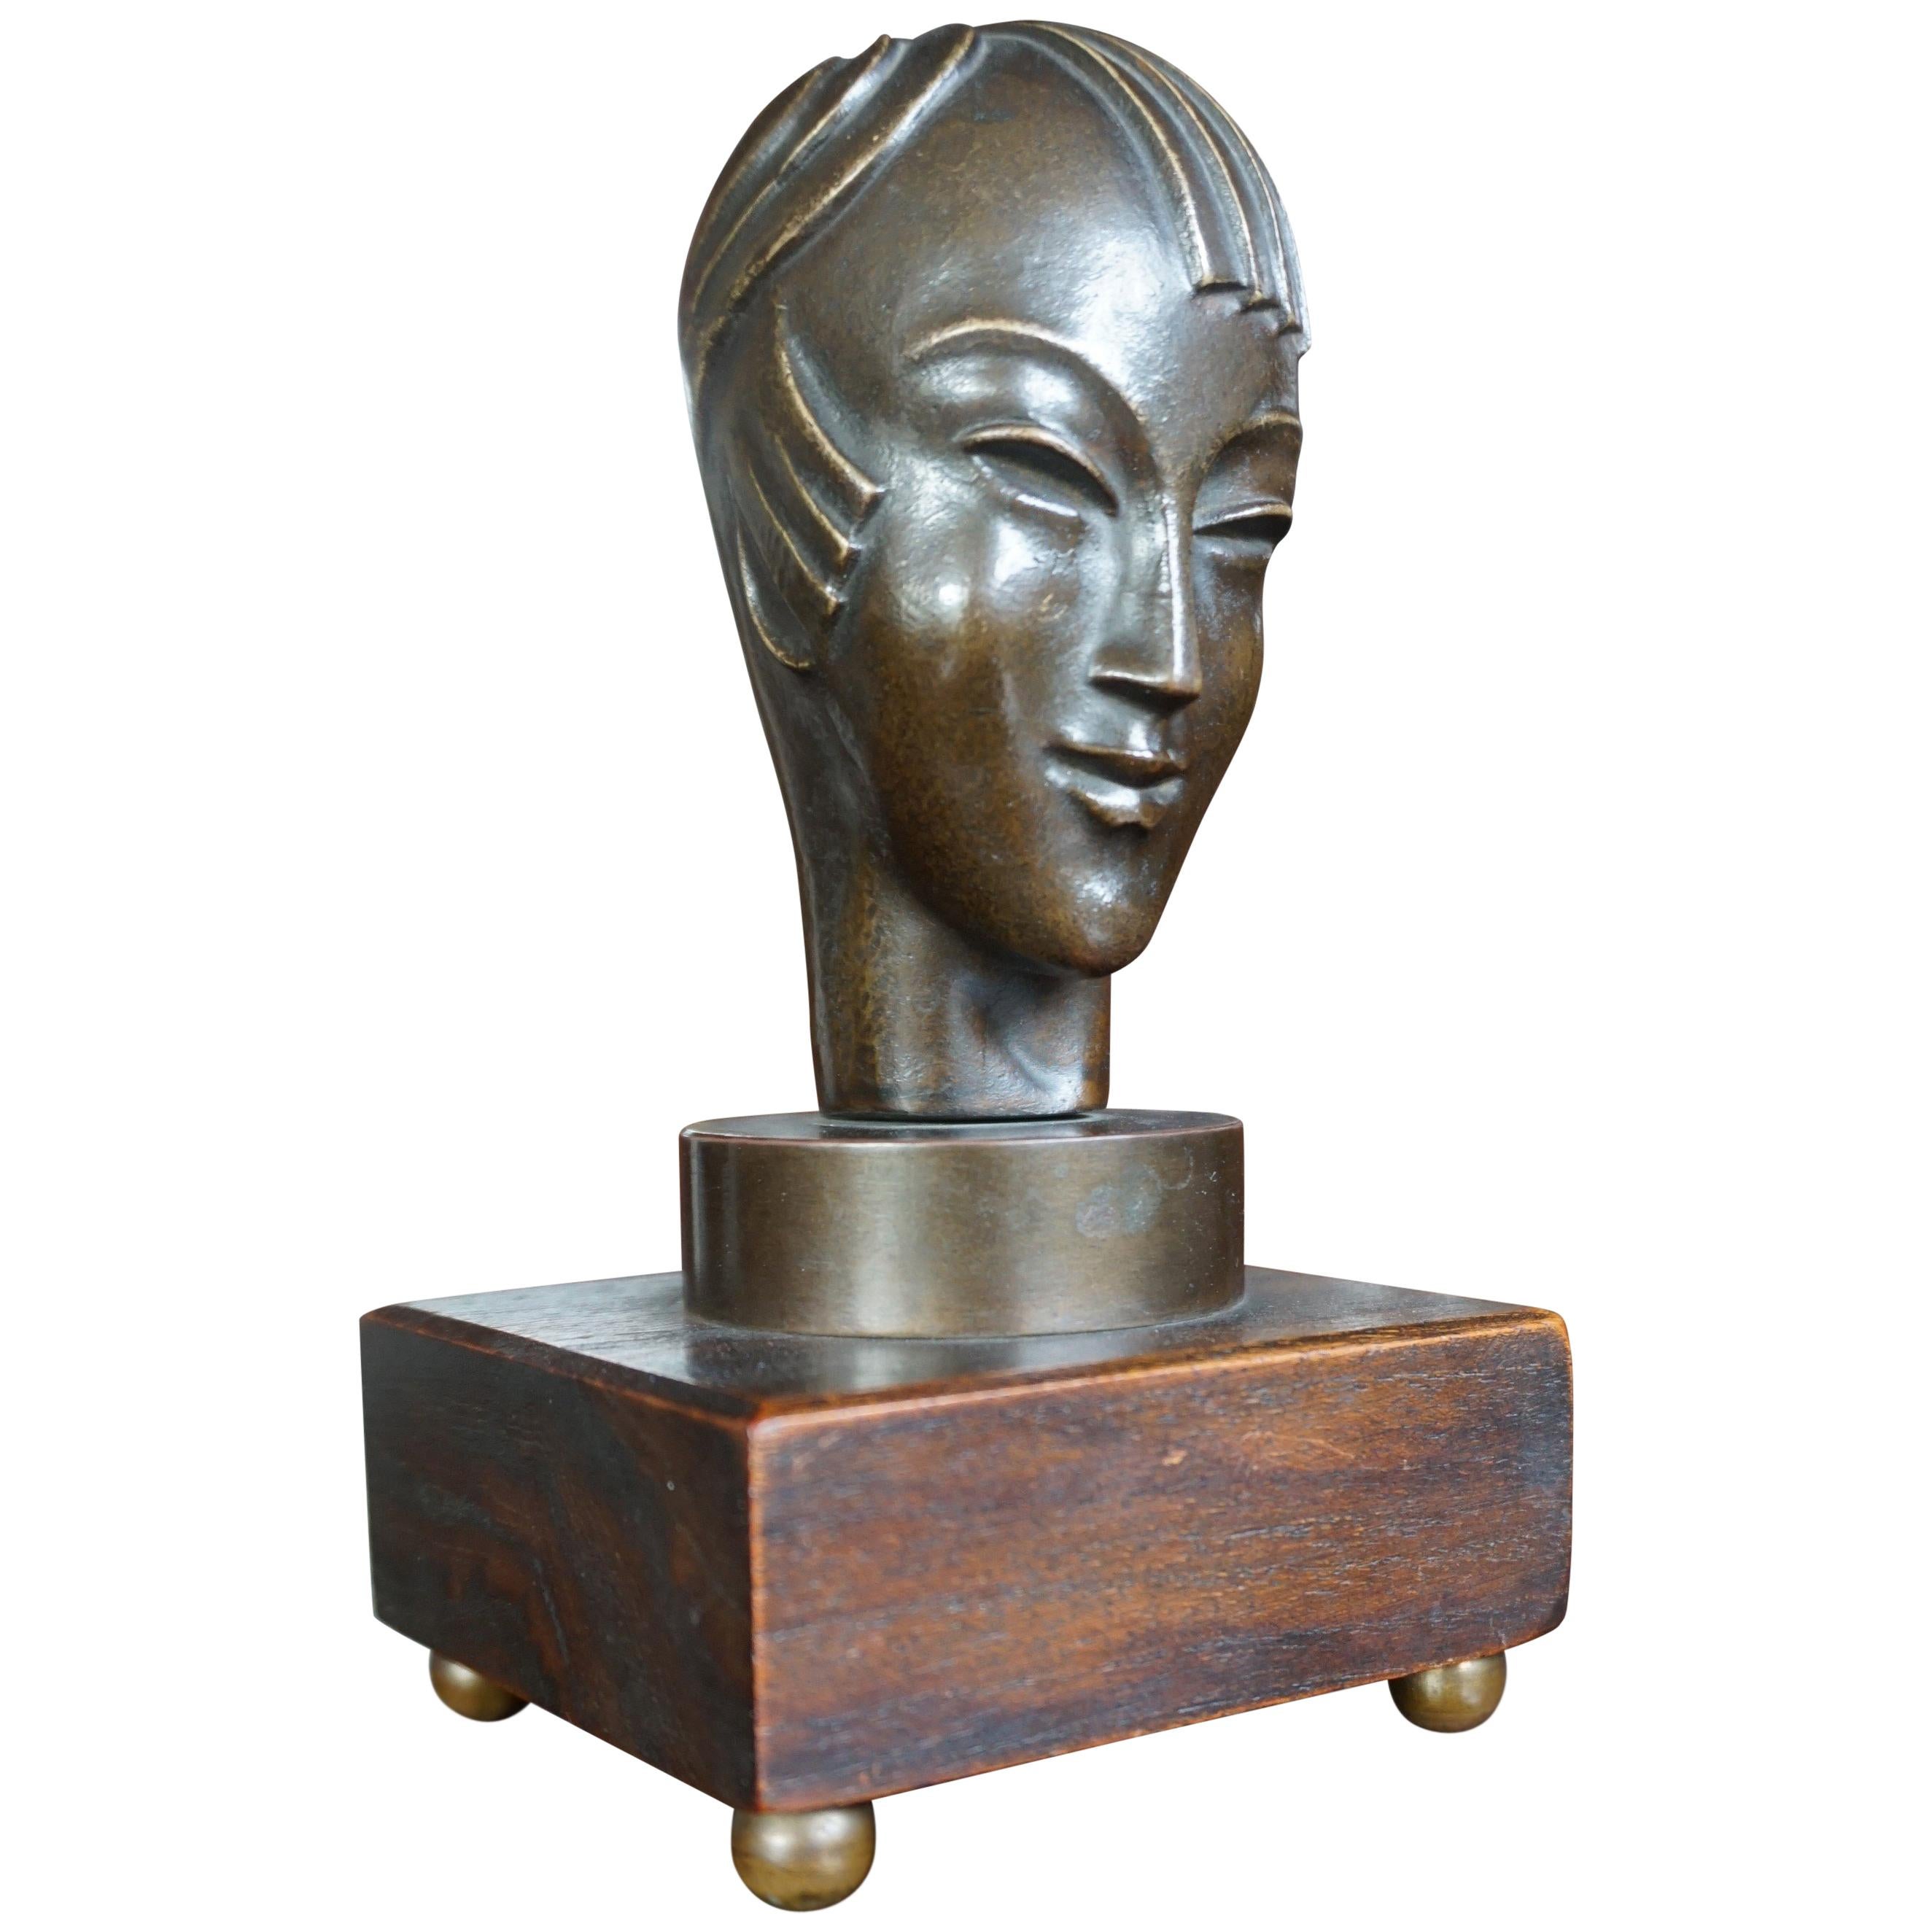 Stunning & Small Art Deco Bronze Androgynous Sculpture with Asian Look and Feel